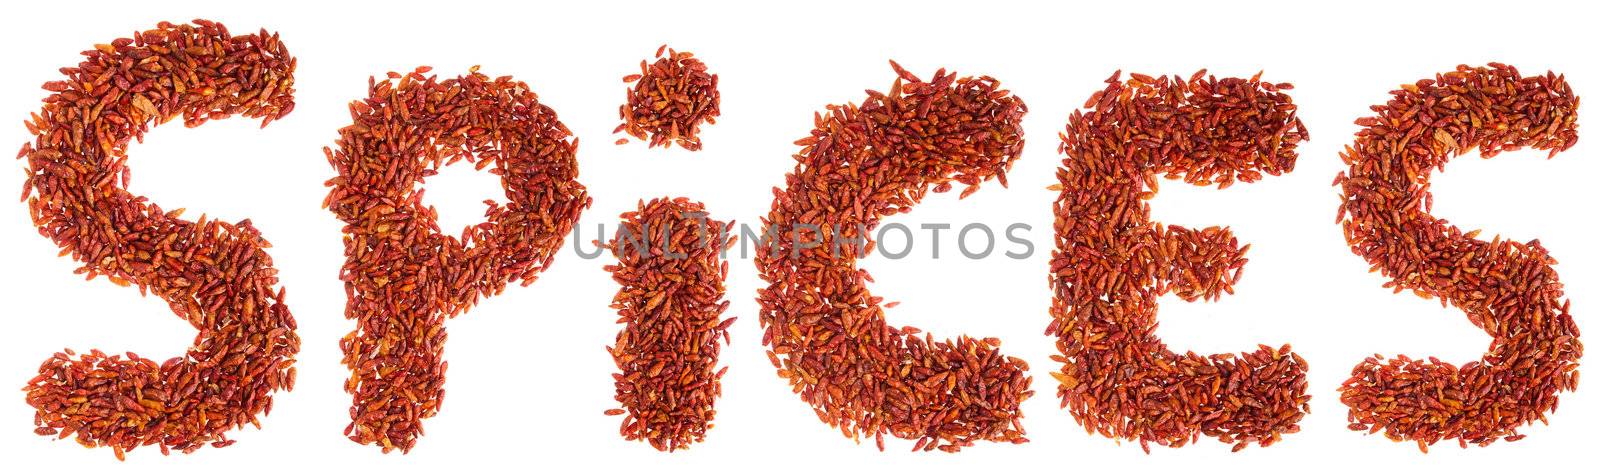 Spices written with chilli peppers by luissantos84